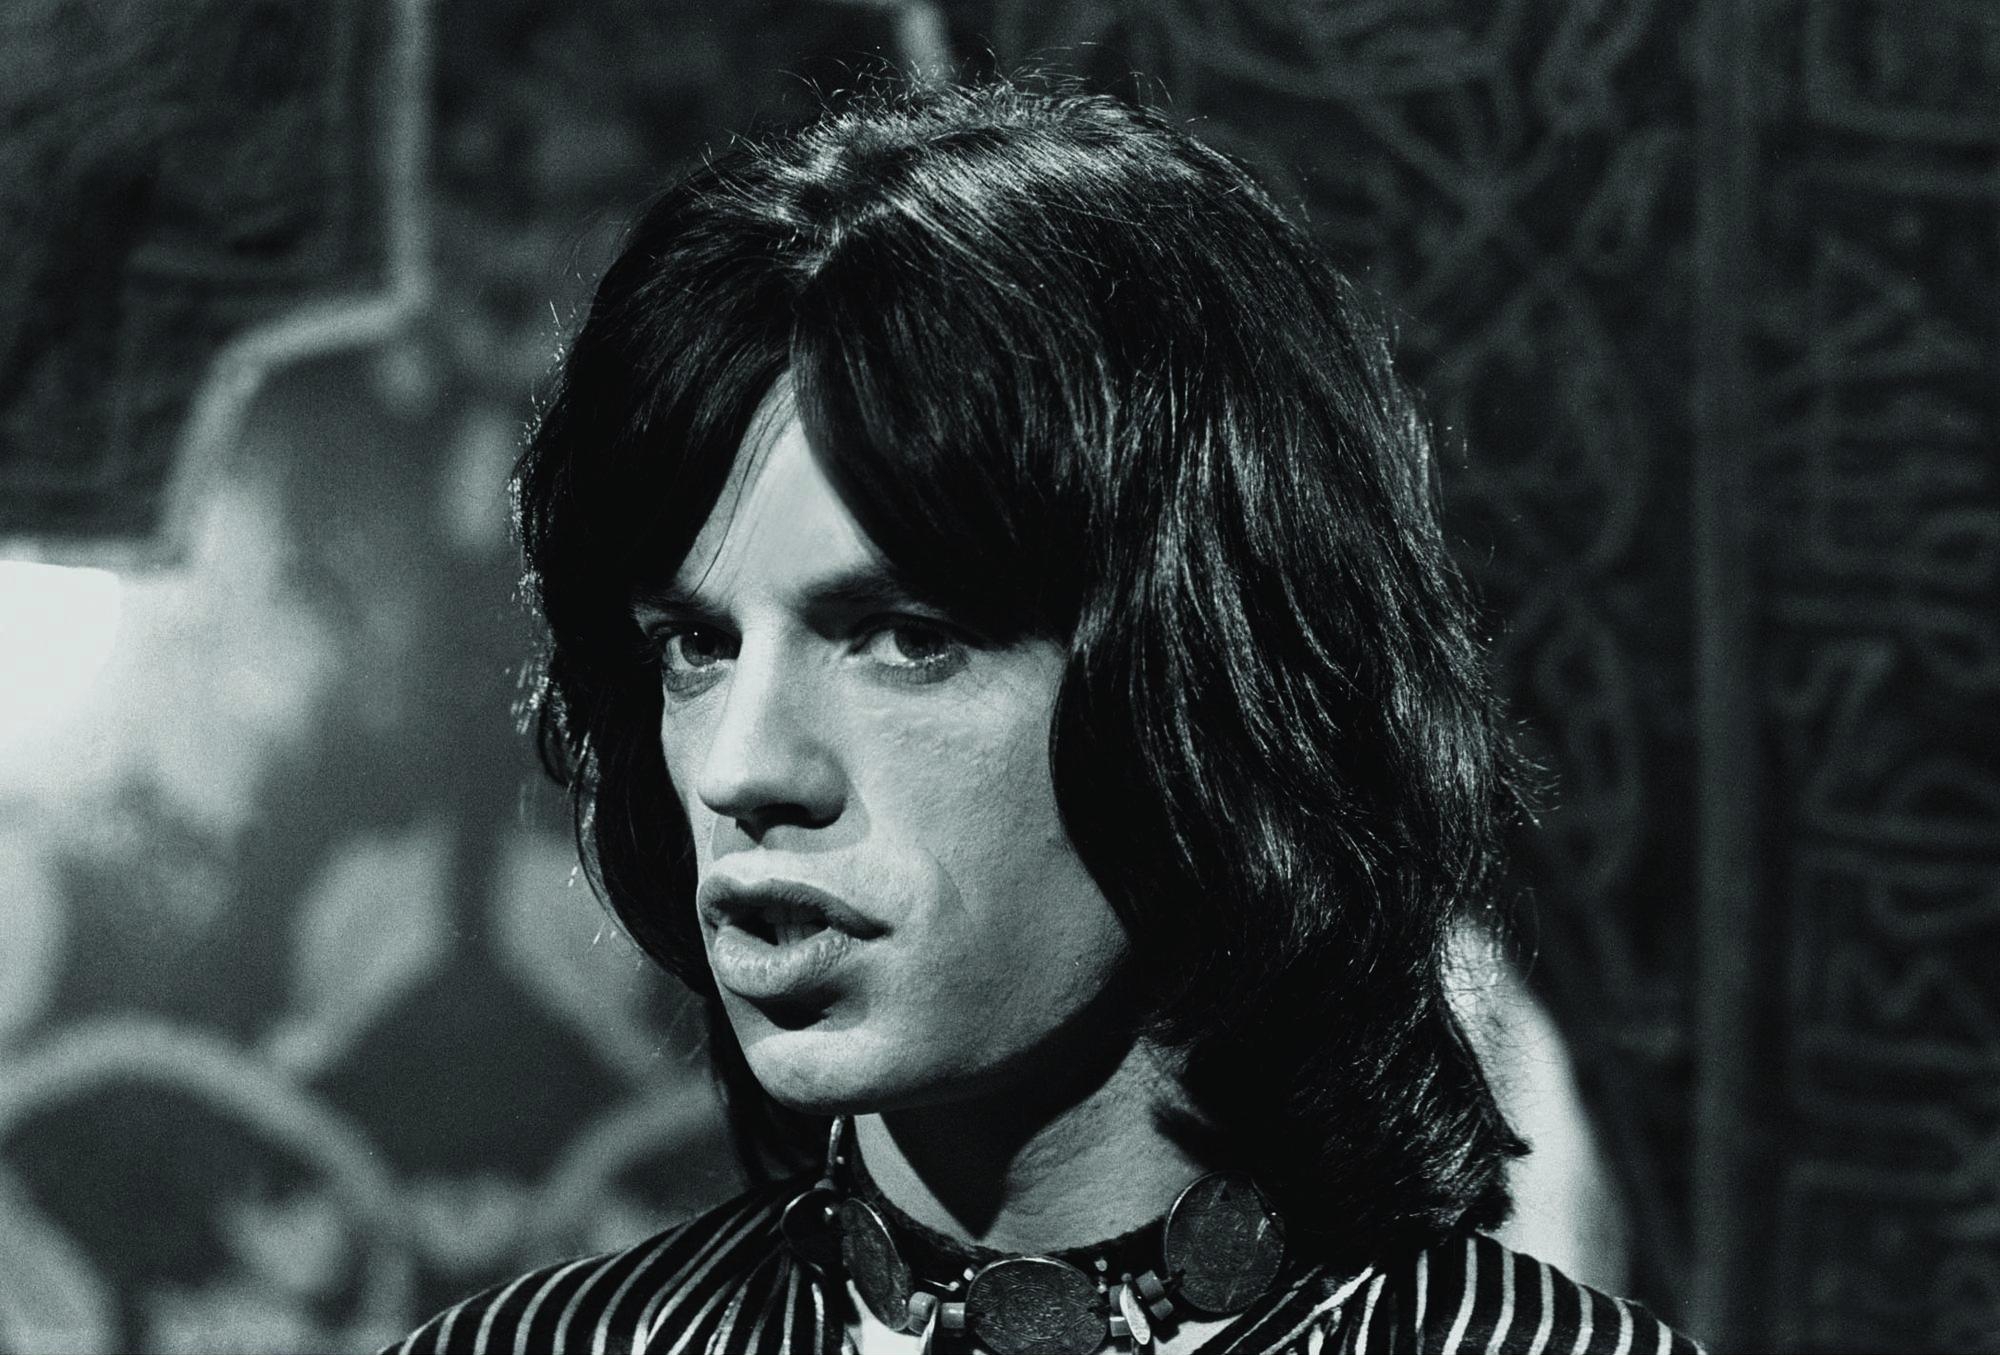 Mick Jagger Wallpaper Image Photos Pictures Background